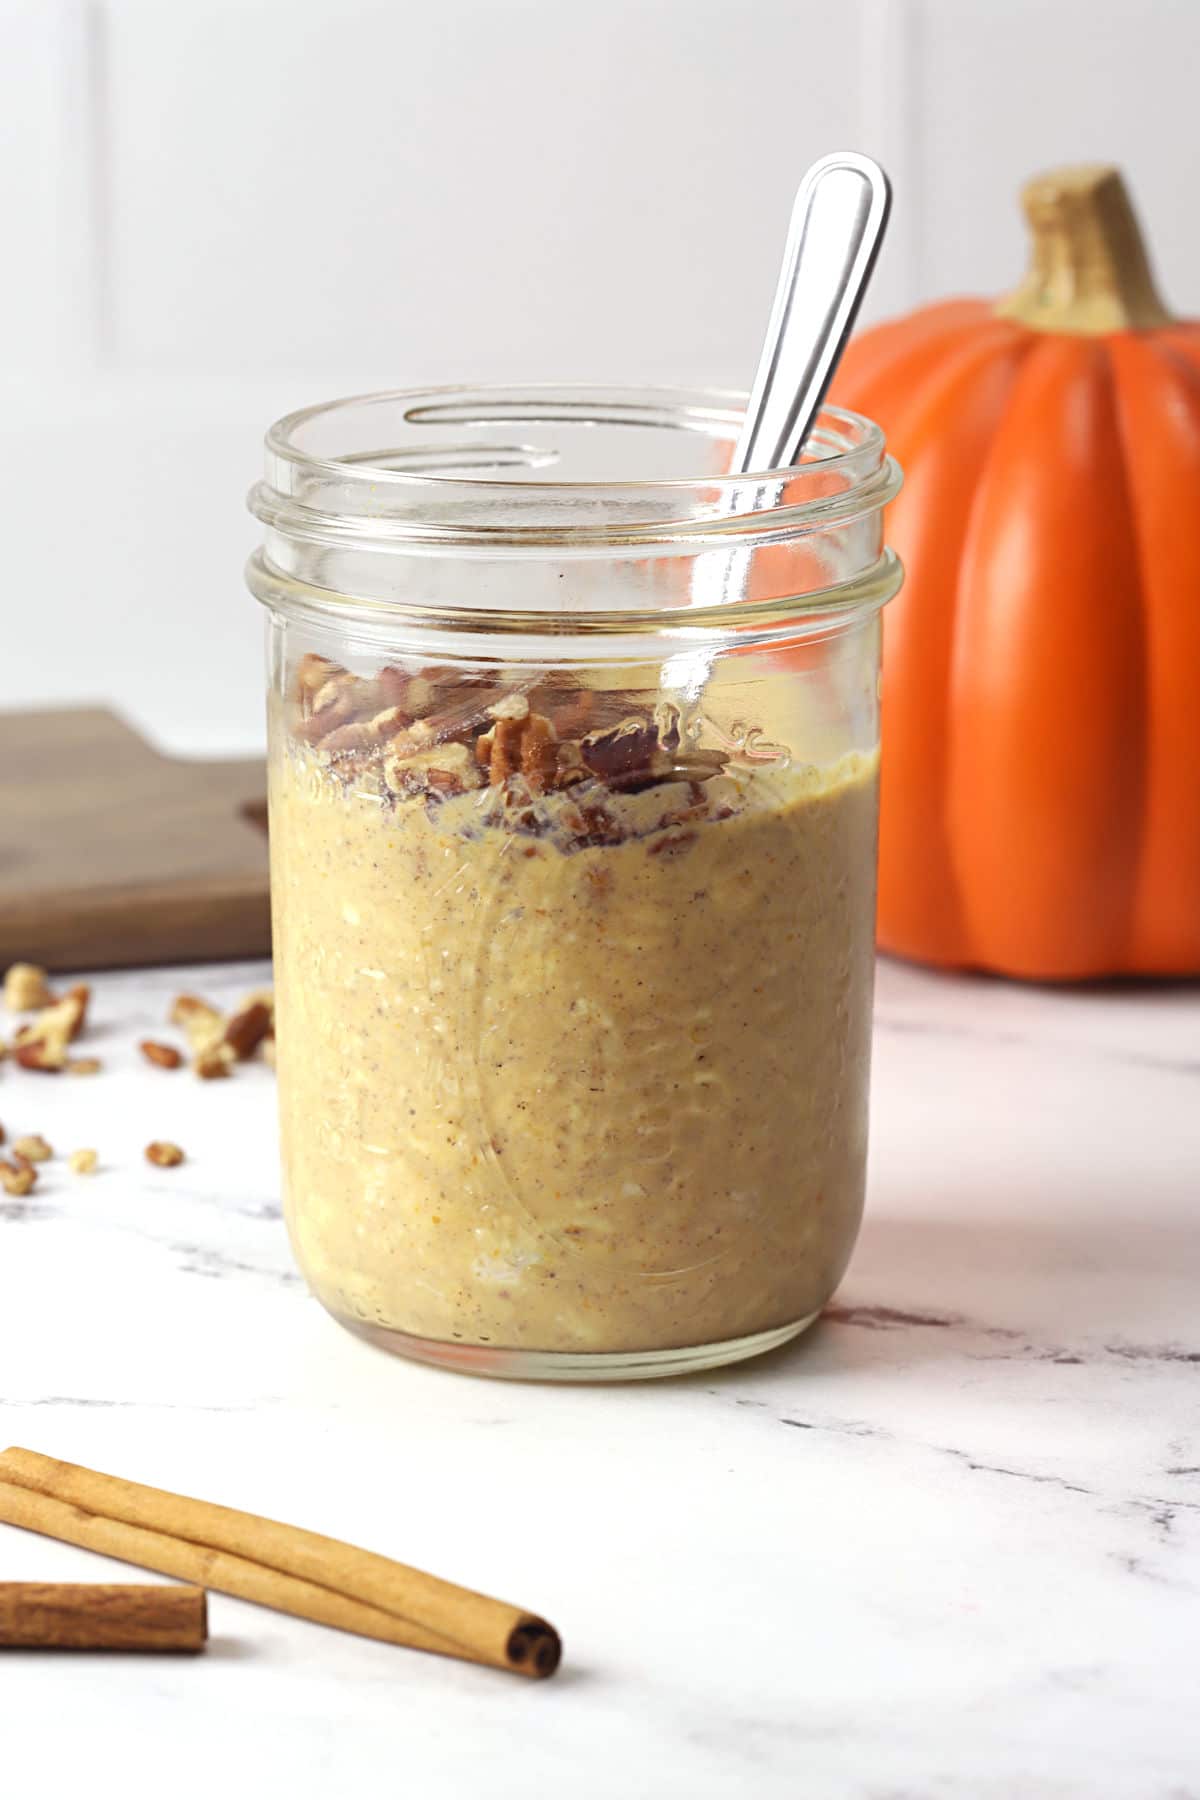 A glass jar filled with pumpkin overnight oats and a metal spoon.